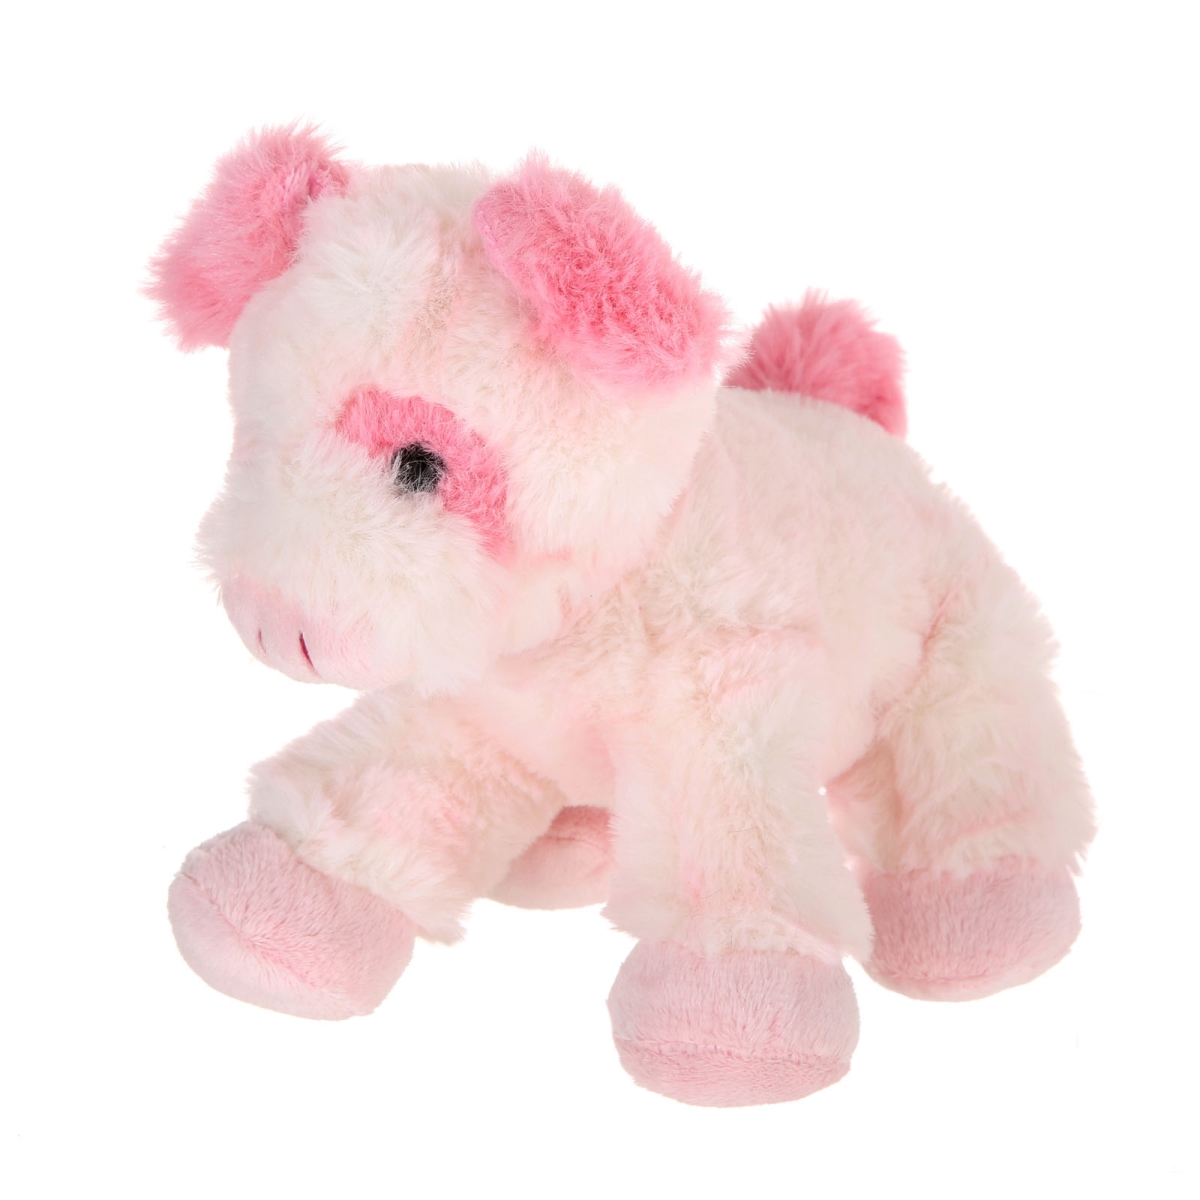 Picture of Giftable World A00051 7 in. Plush Lying Pig